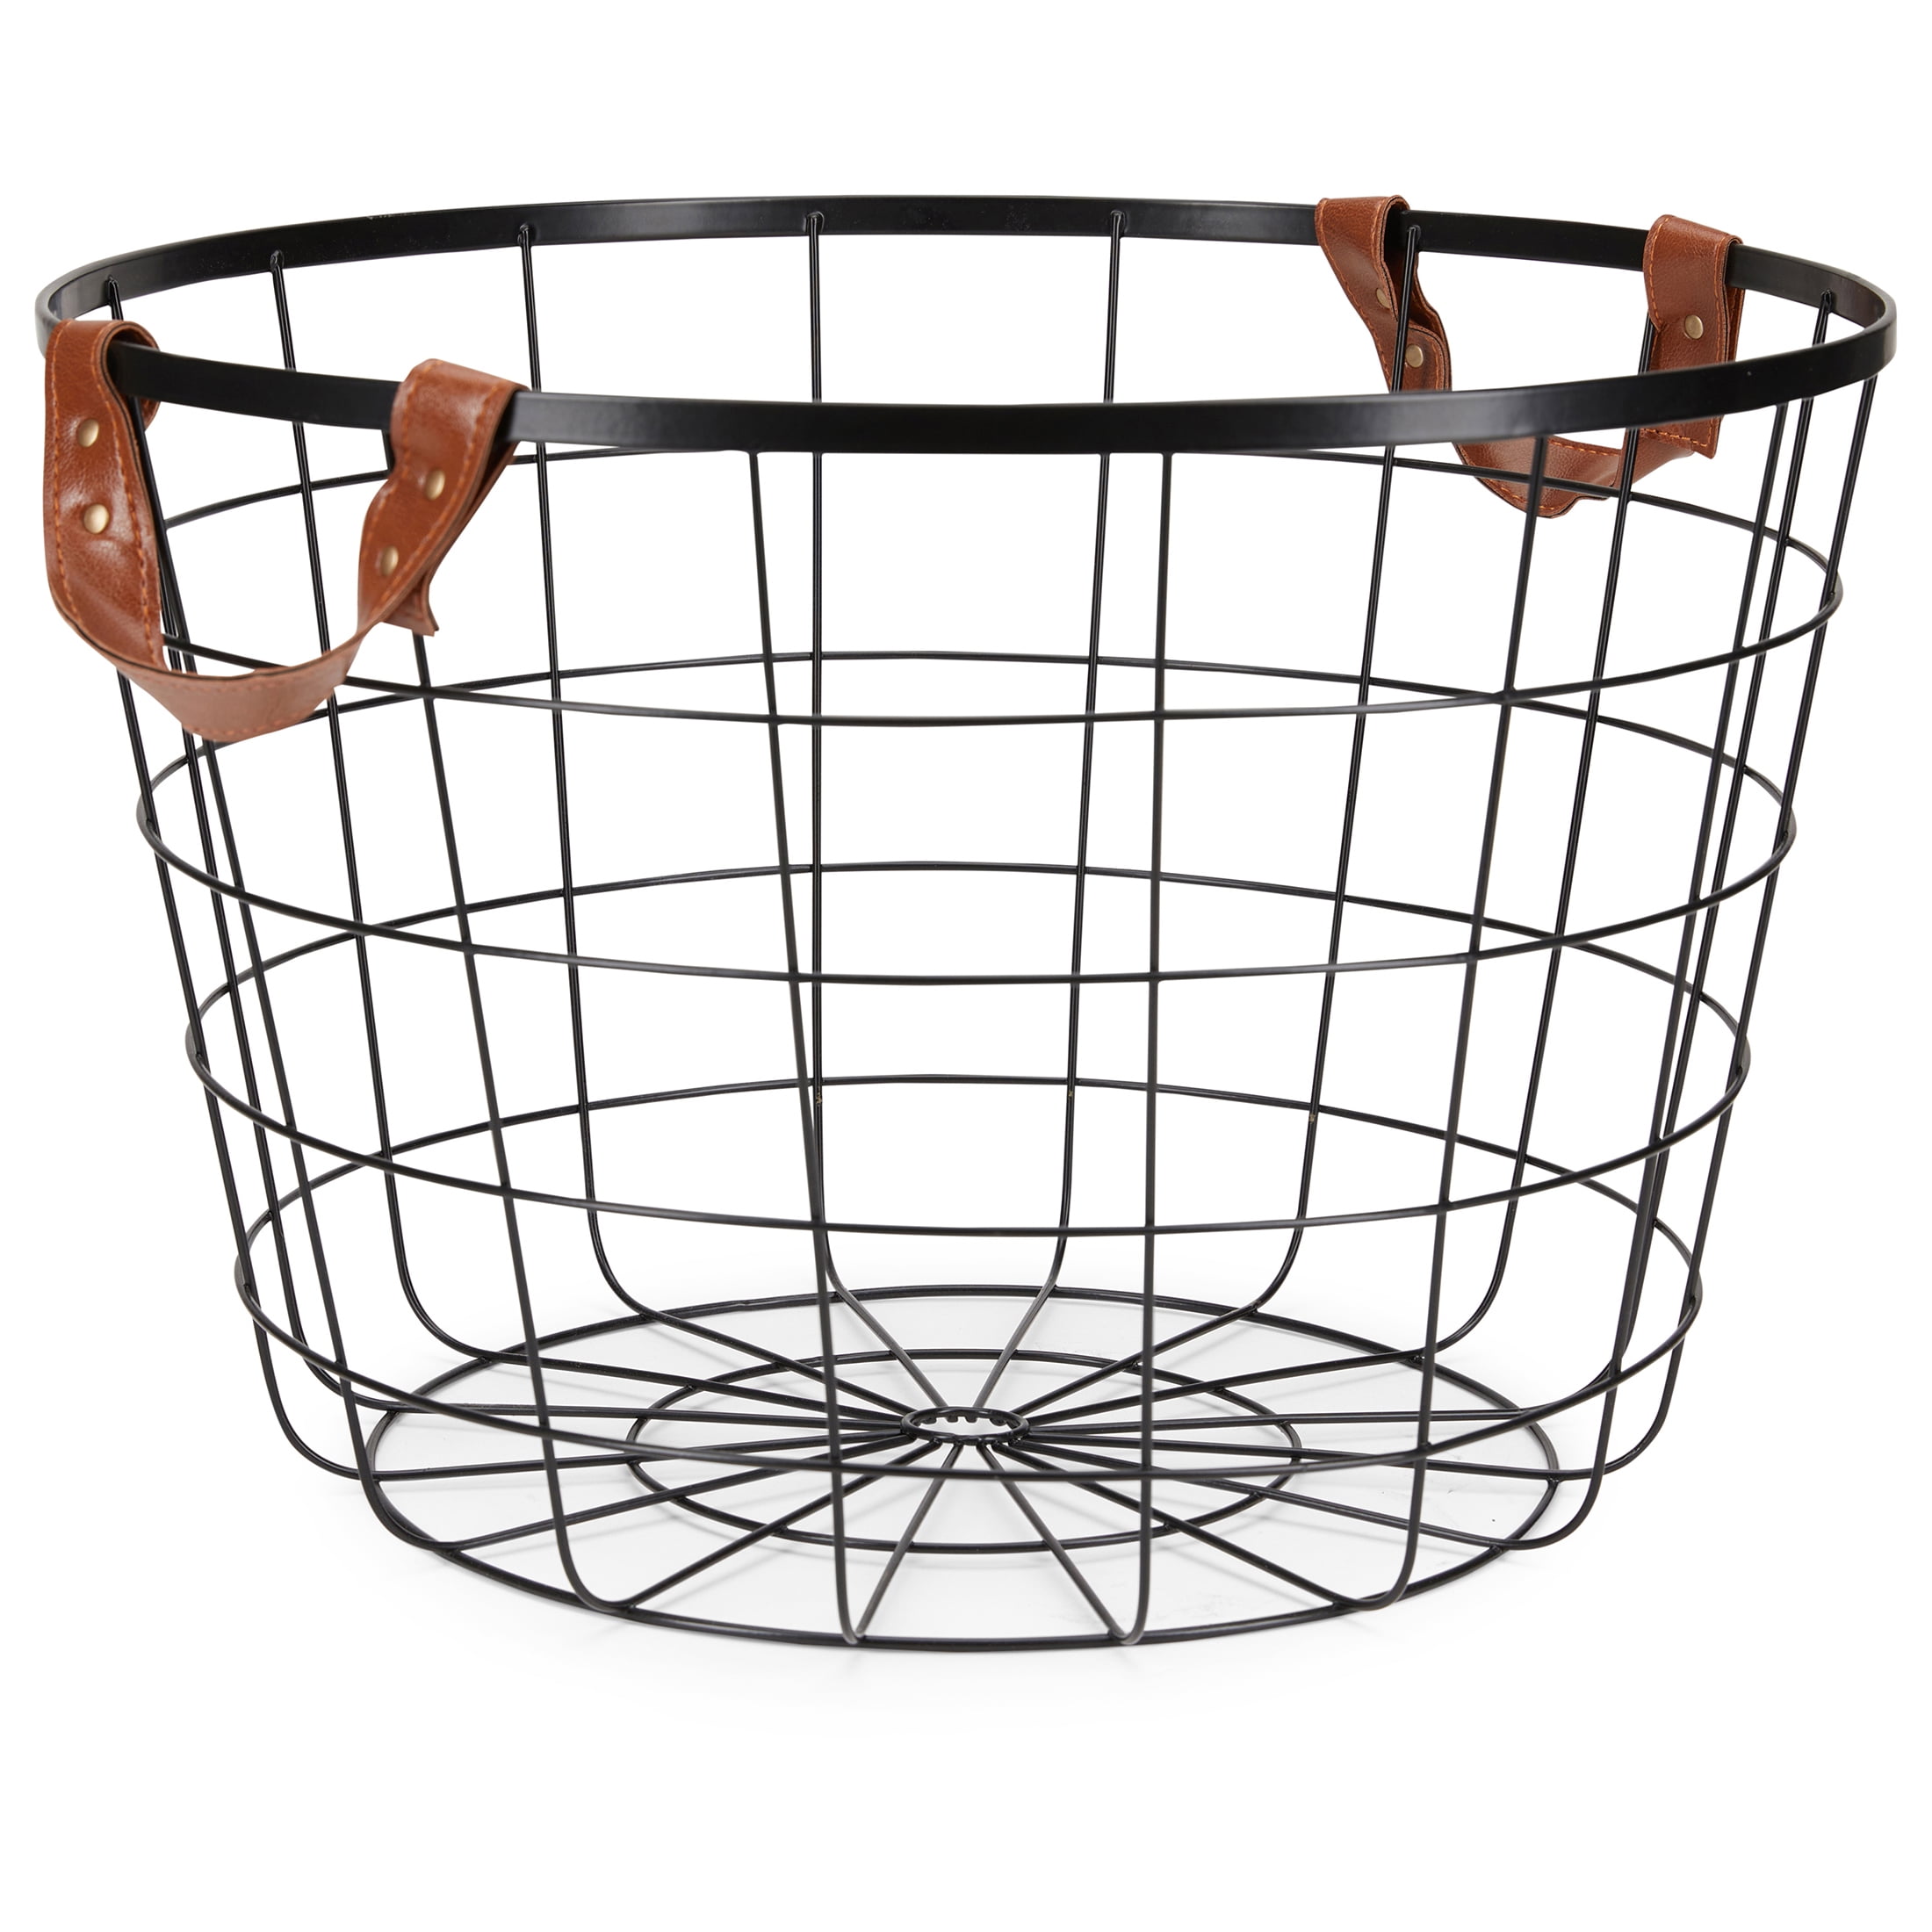 Mainstays, Round Wire Basket With Handles, Large Size, Black